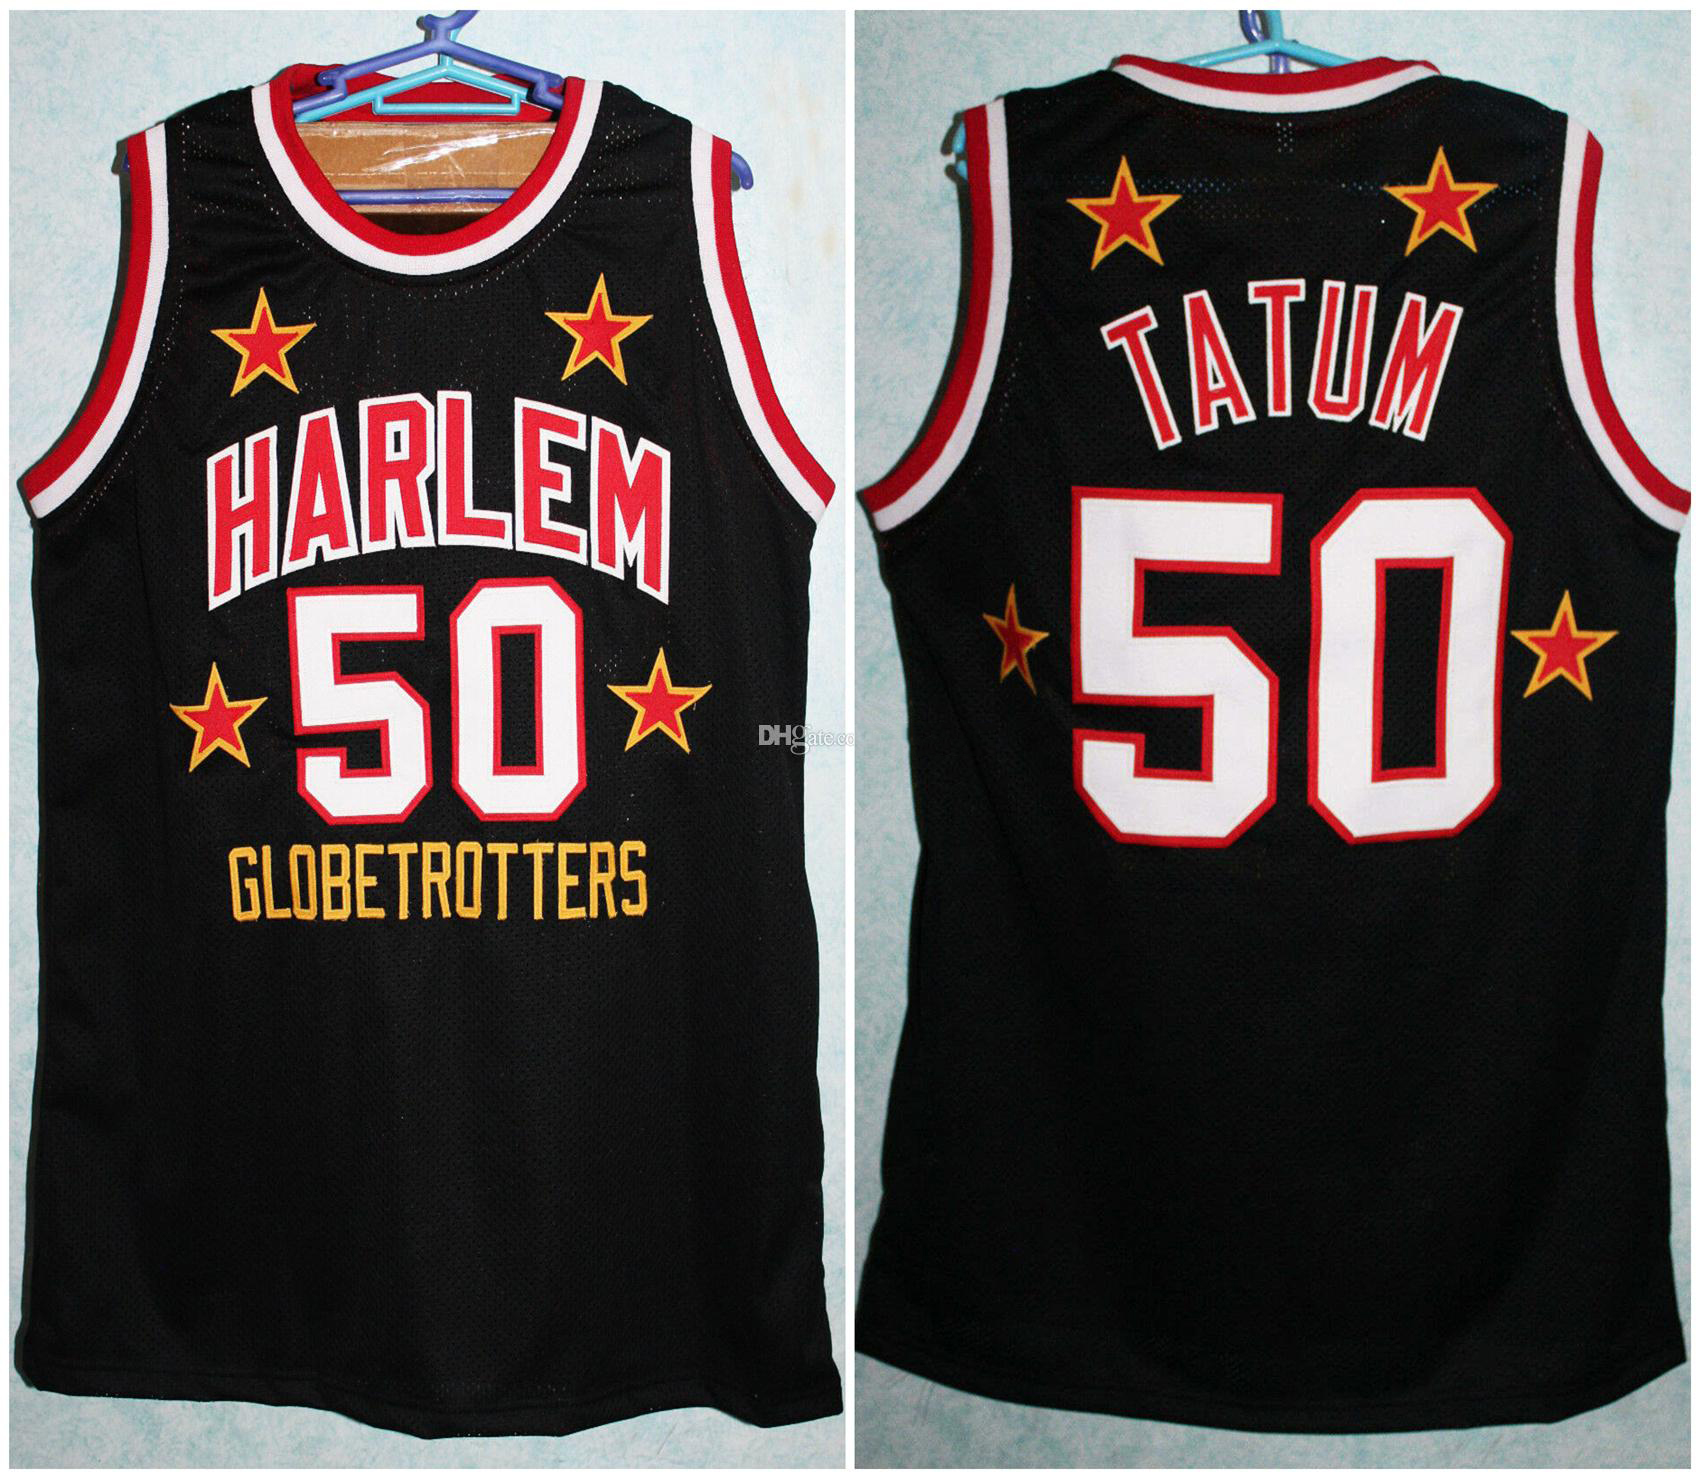 

Reece Goose Tatum #50 Harlem Globetrotters Retro Basketball Jersey Men's Stitched Custom Any Number Name Jerseys, As show